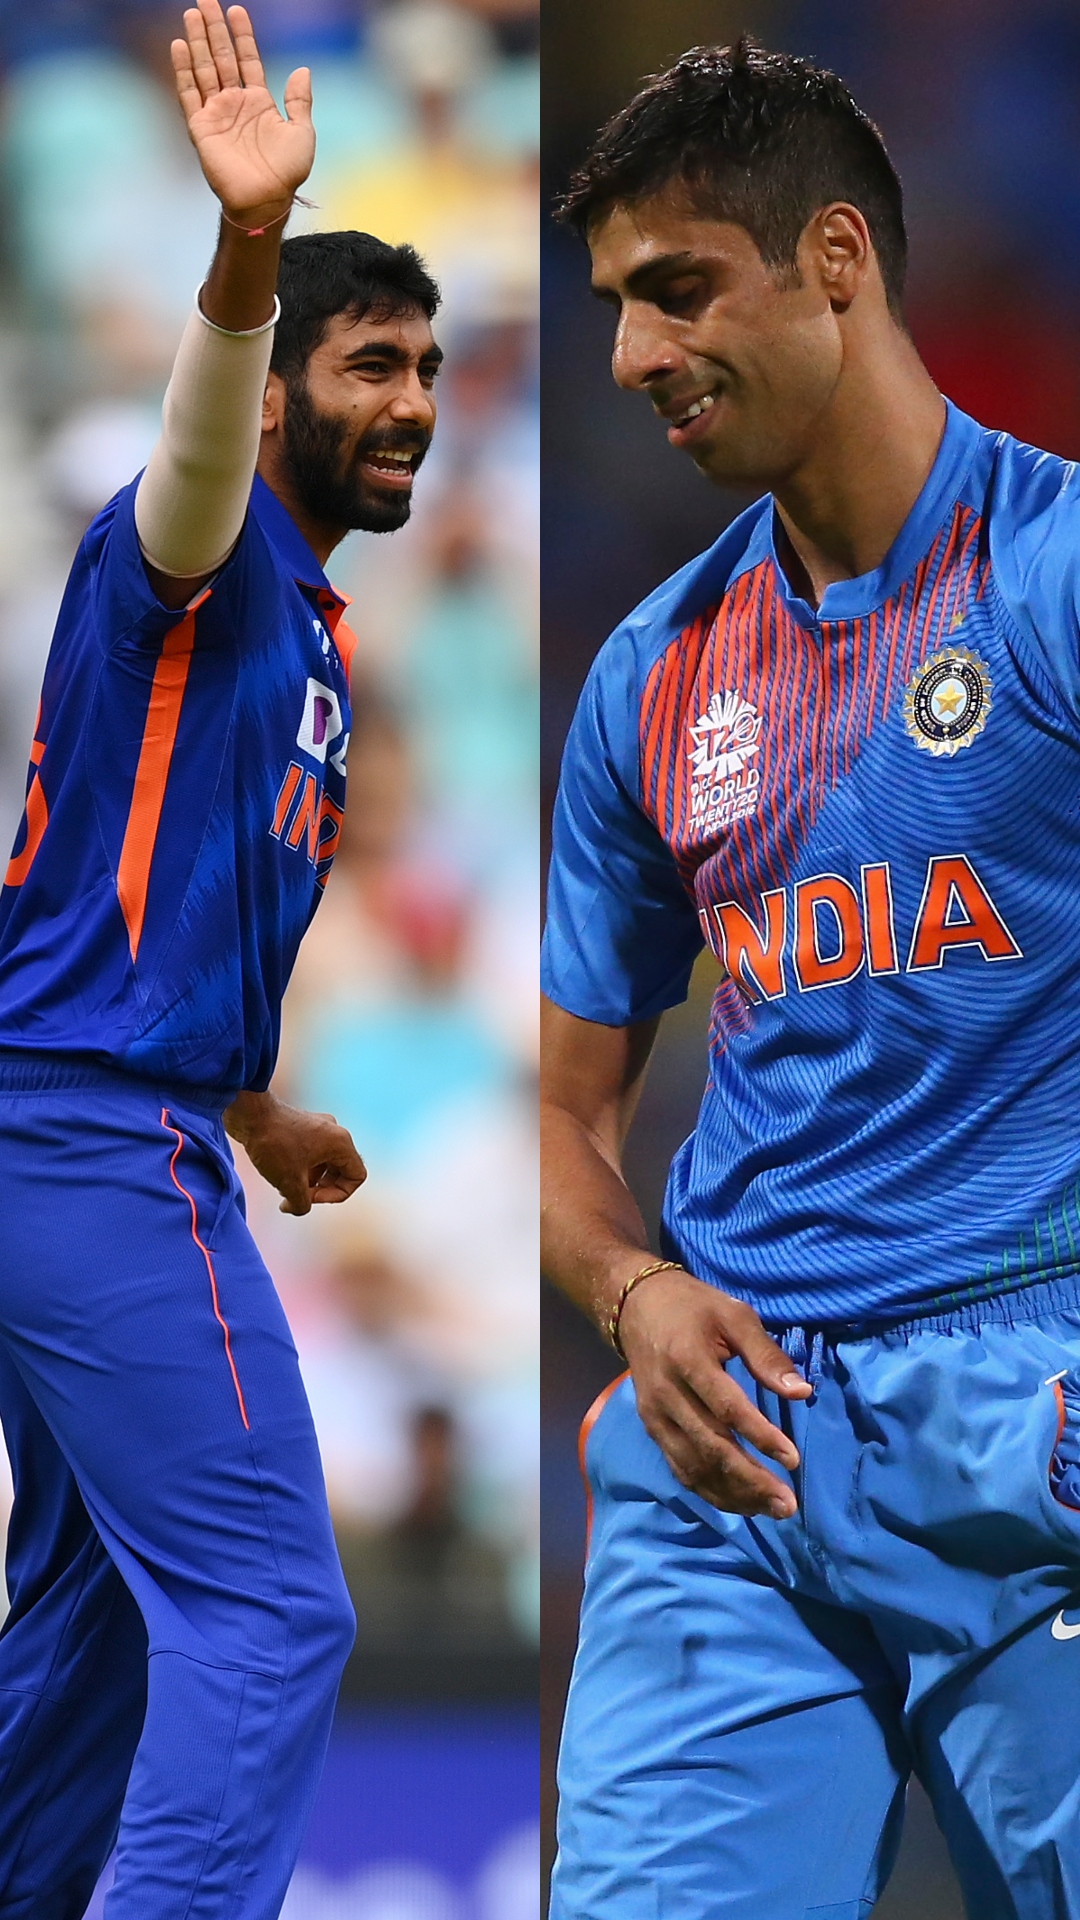 IND vs SL 1st ODI: Jasprit Bumrah to Ashish Nehra, list of Indian bowlers with best bowling figures against Sri Lanka